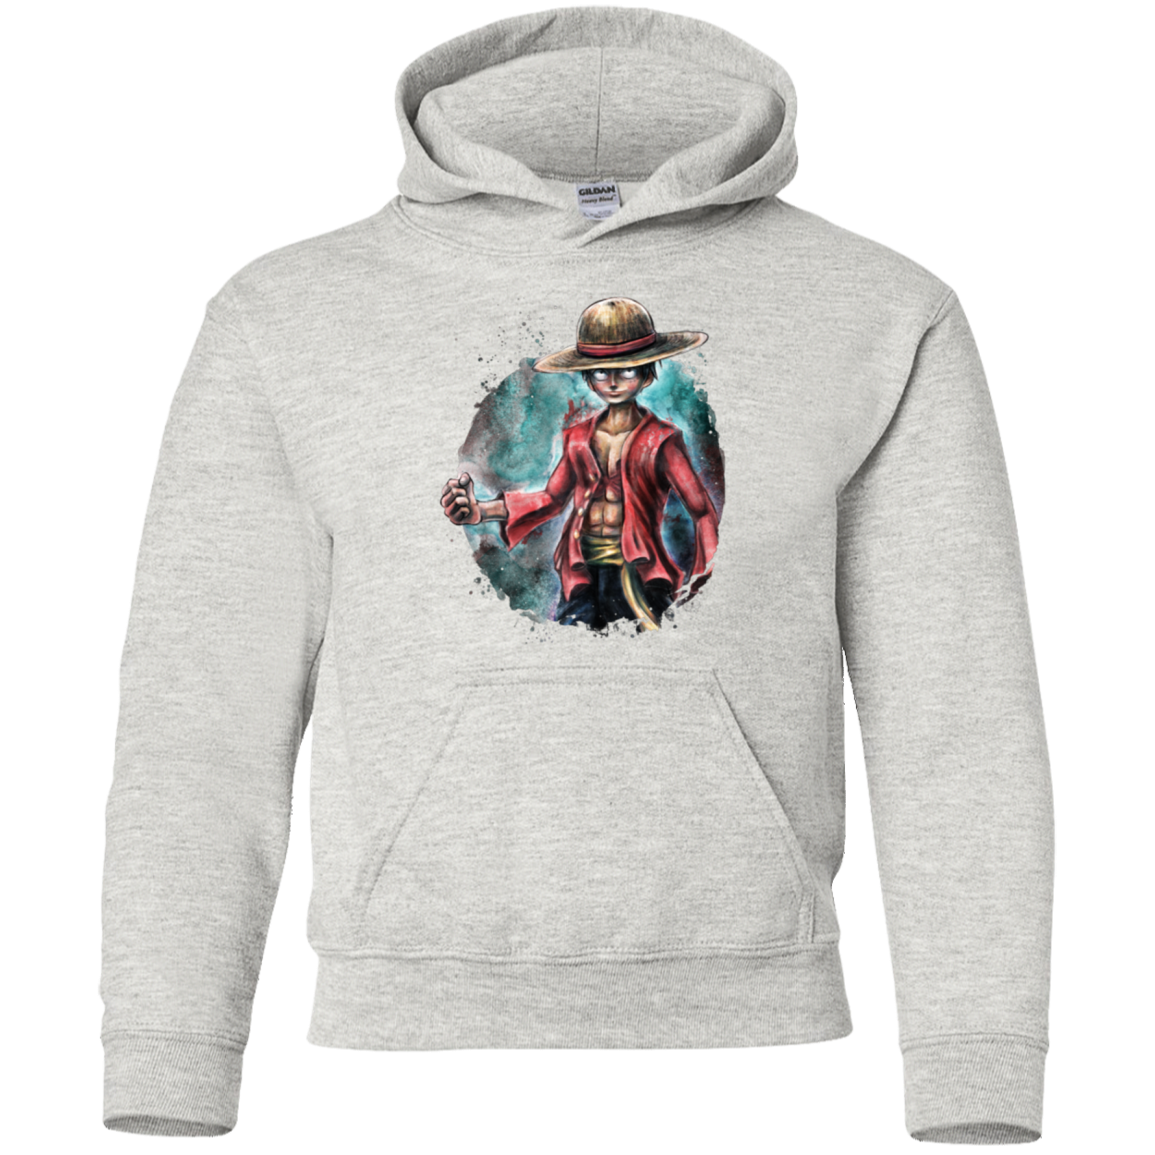 LUFFY Youth Hoodie